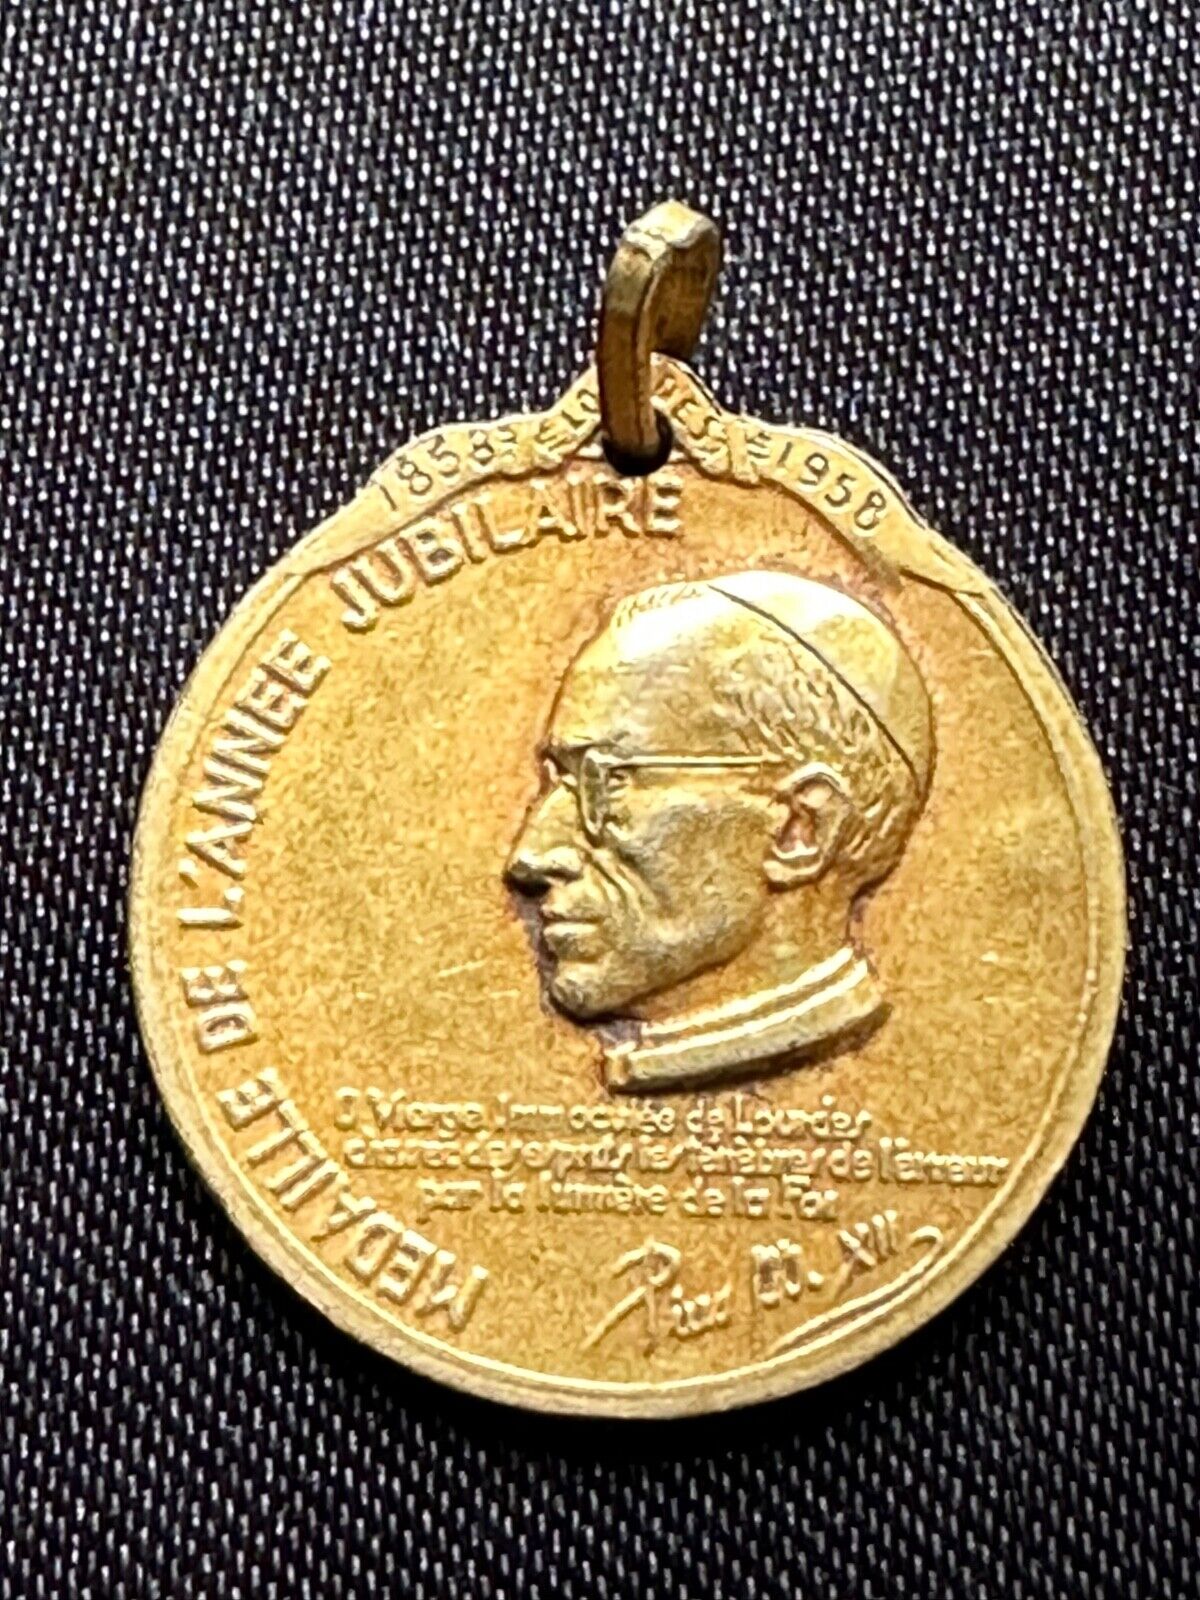 Rare 1958 Religious Gold plated jubilee medal 1858-1858 Lourdes signed AMA